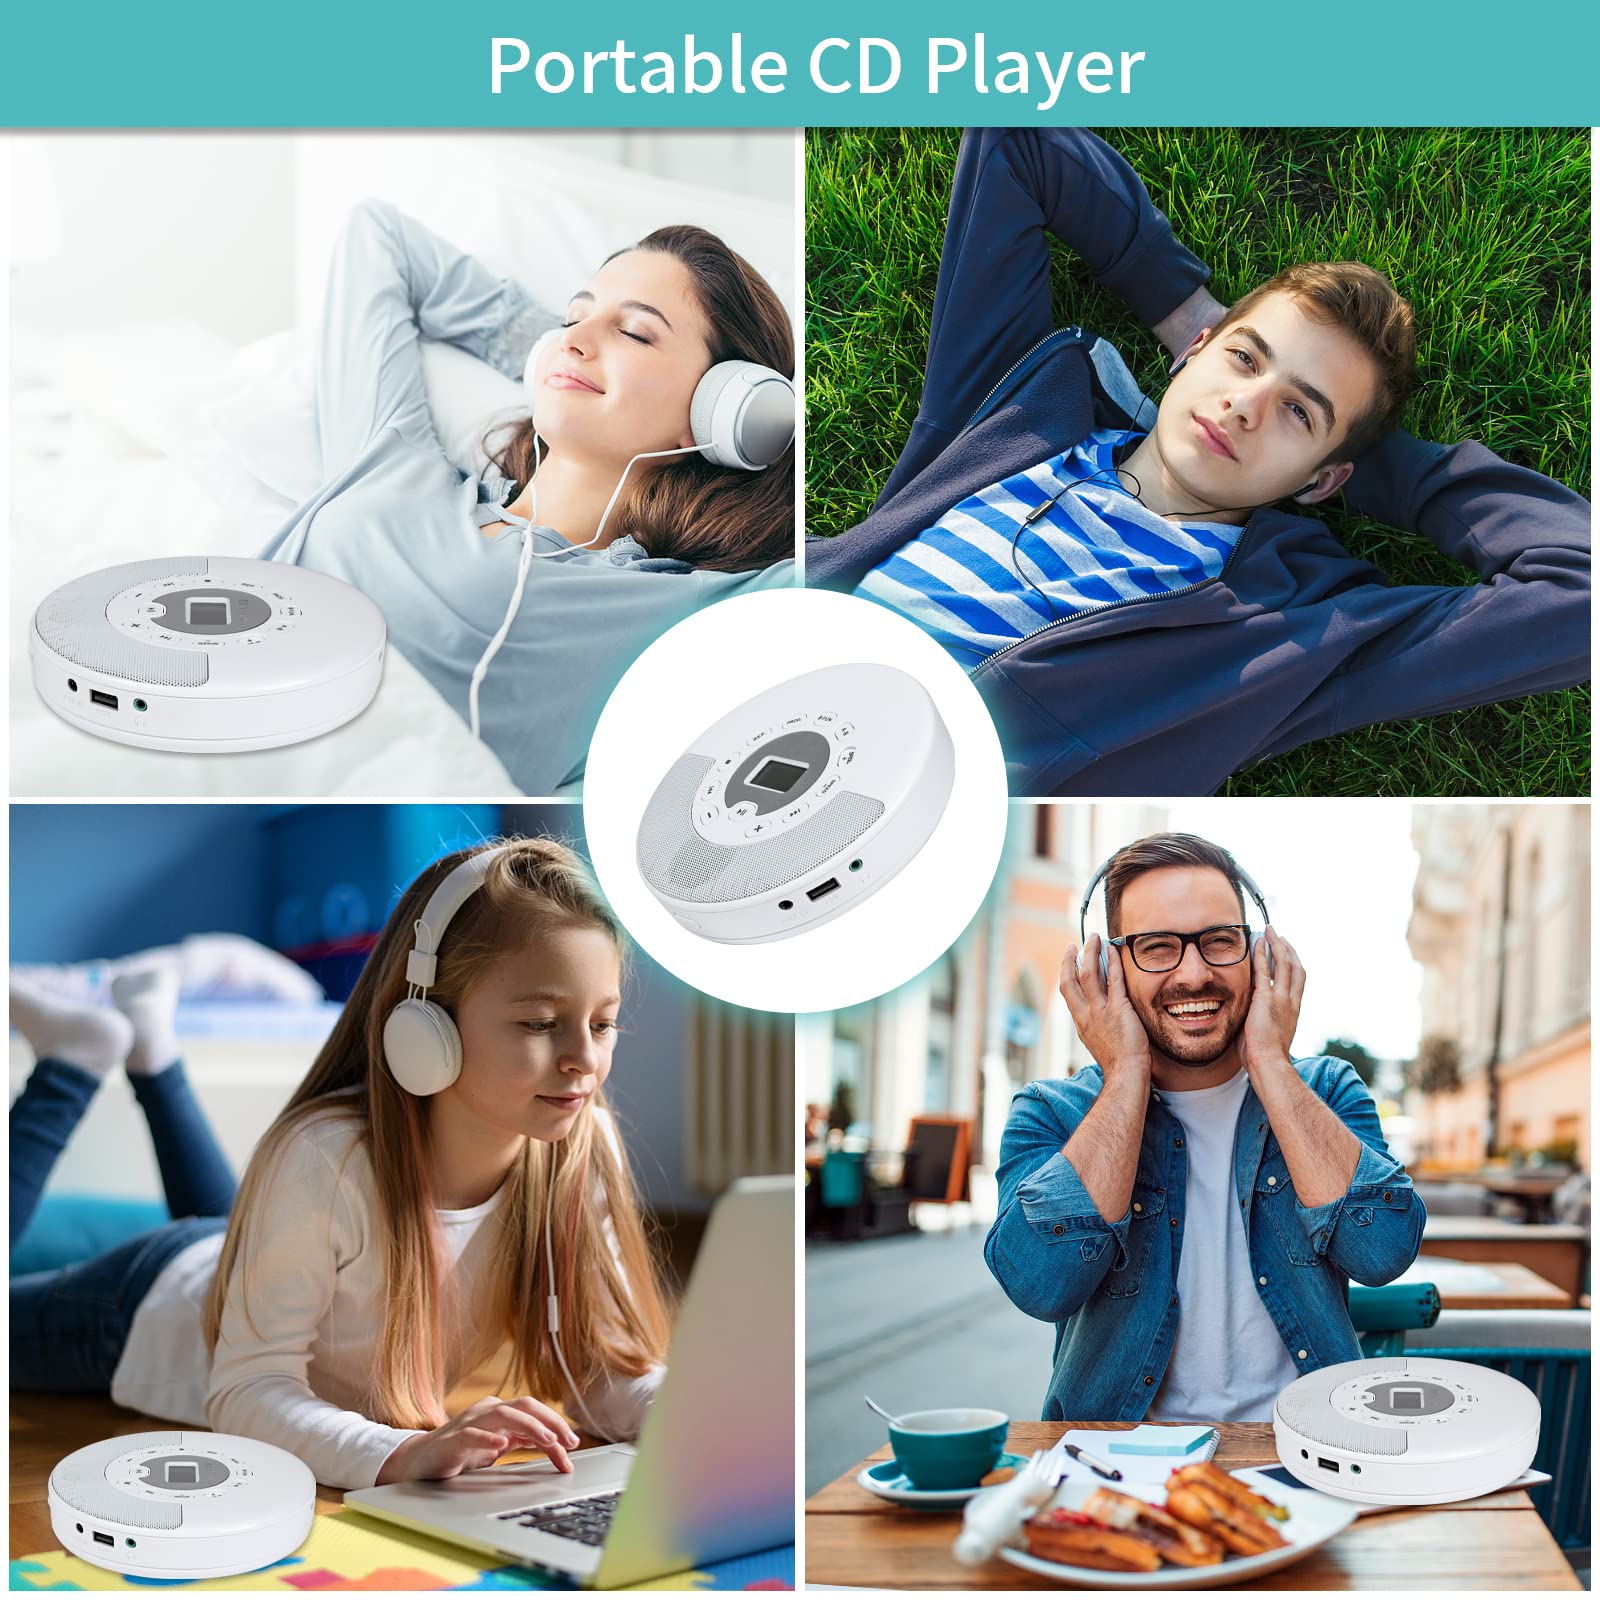 CD Player Portable with Bluetooth - Rechargeable Personal CD Player with Stereo Speakers,Anti-Skip Walkman CD Music Player for Car/Travel with Headphones and AUX Cable,Support CD USB AUX Input